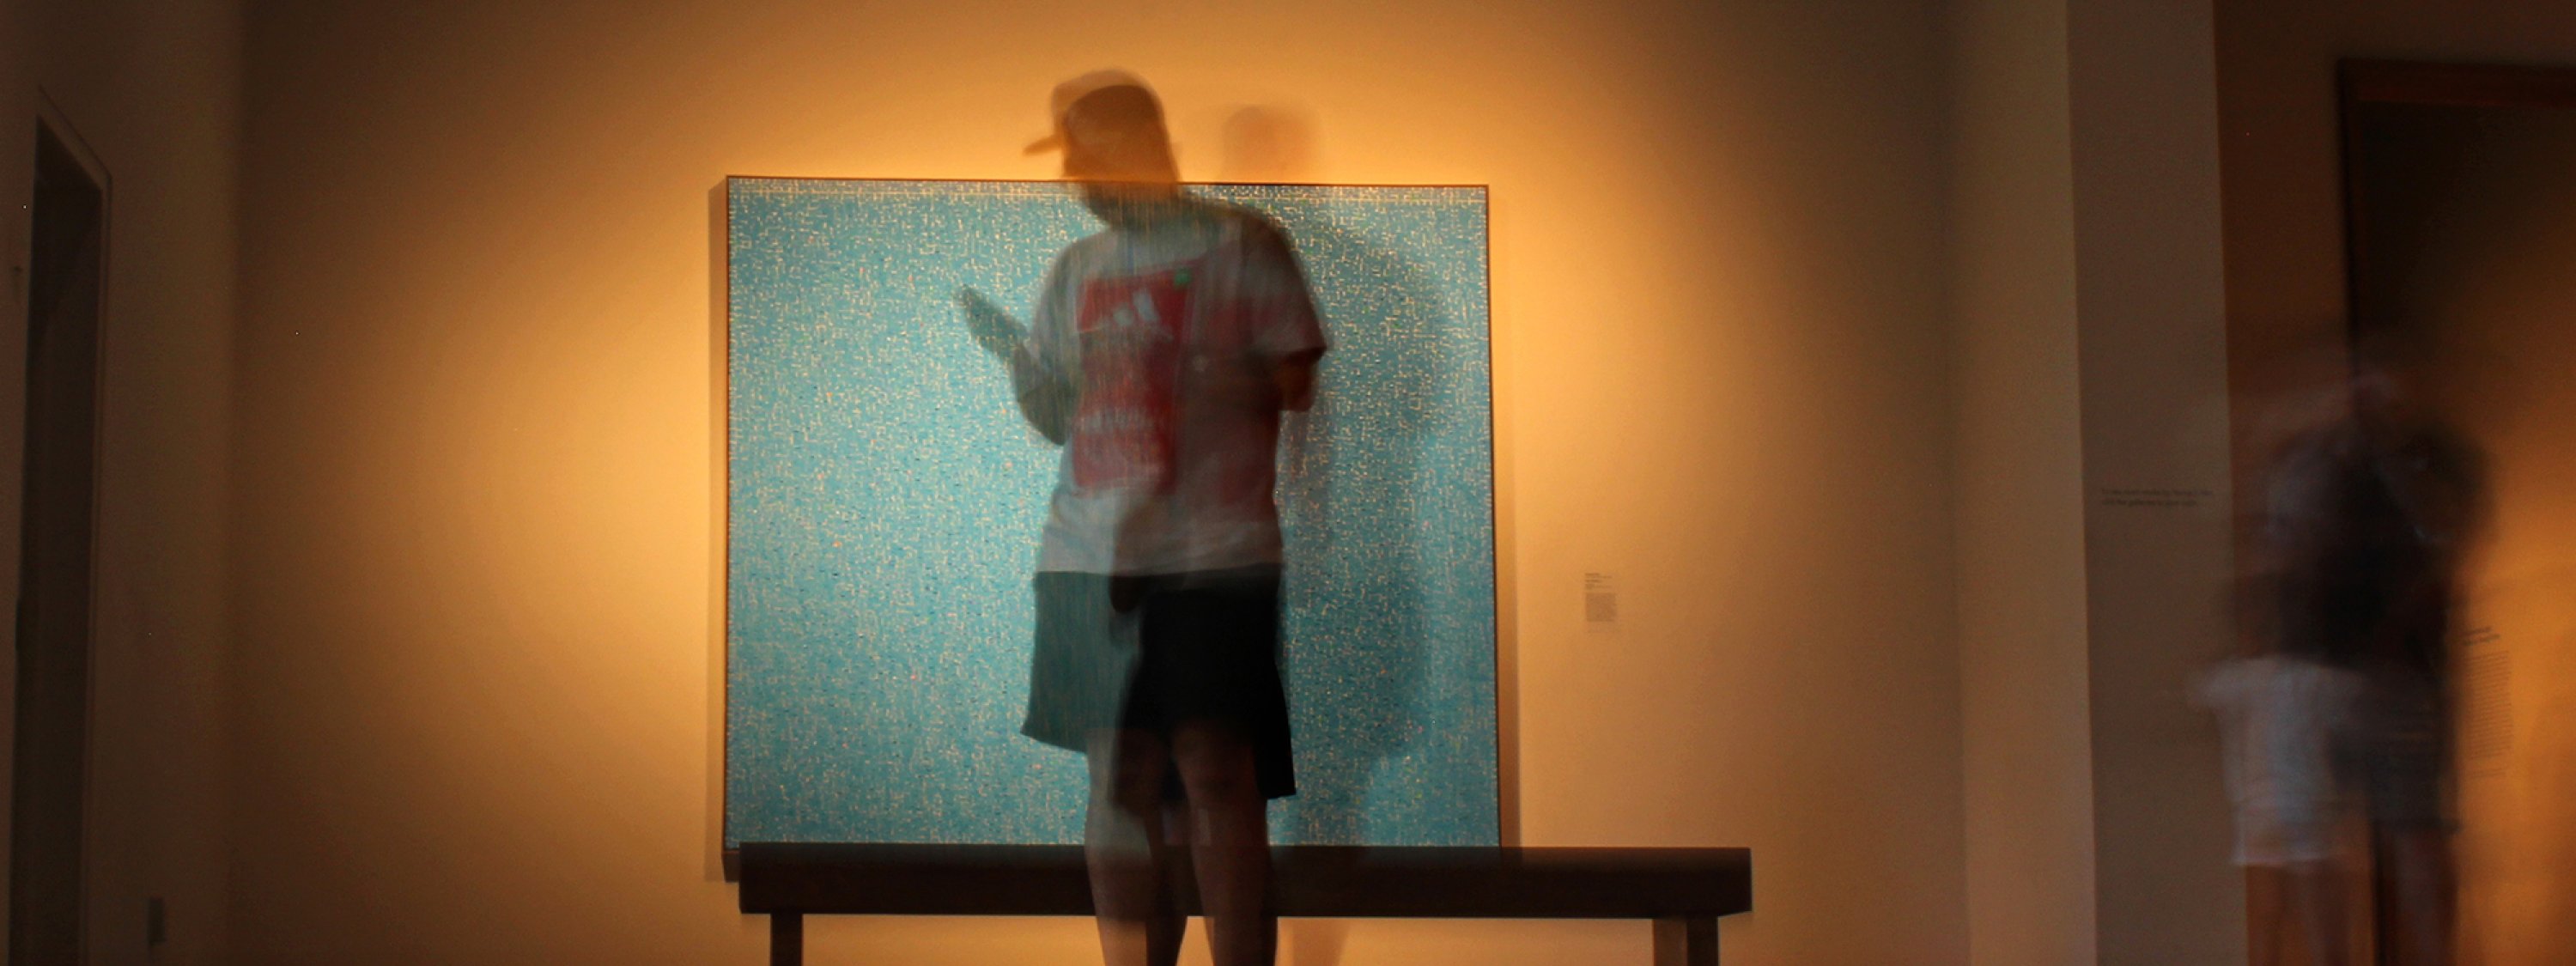 Blurred person standing in front of an art piece on their phone.